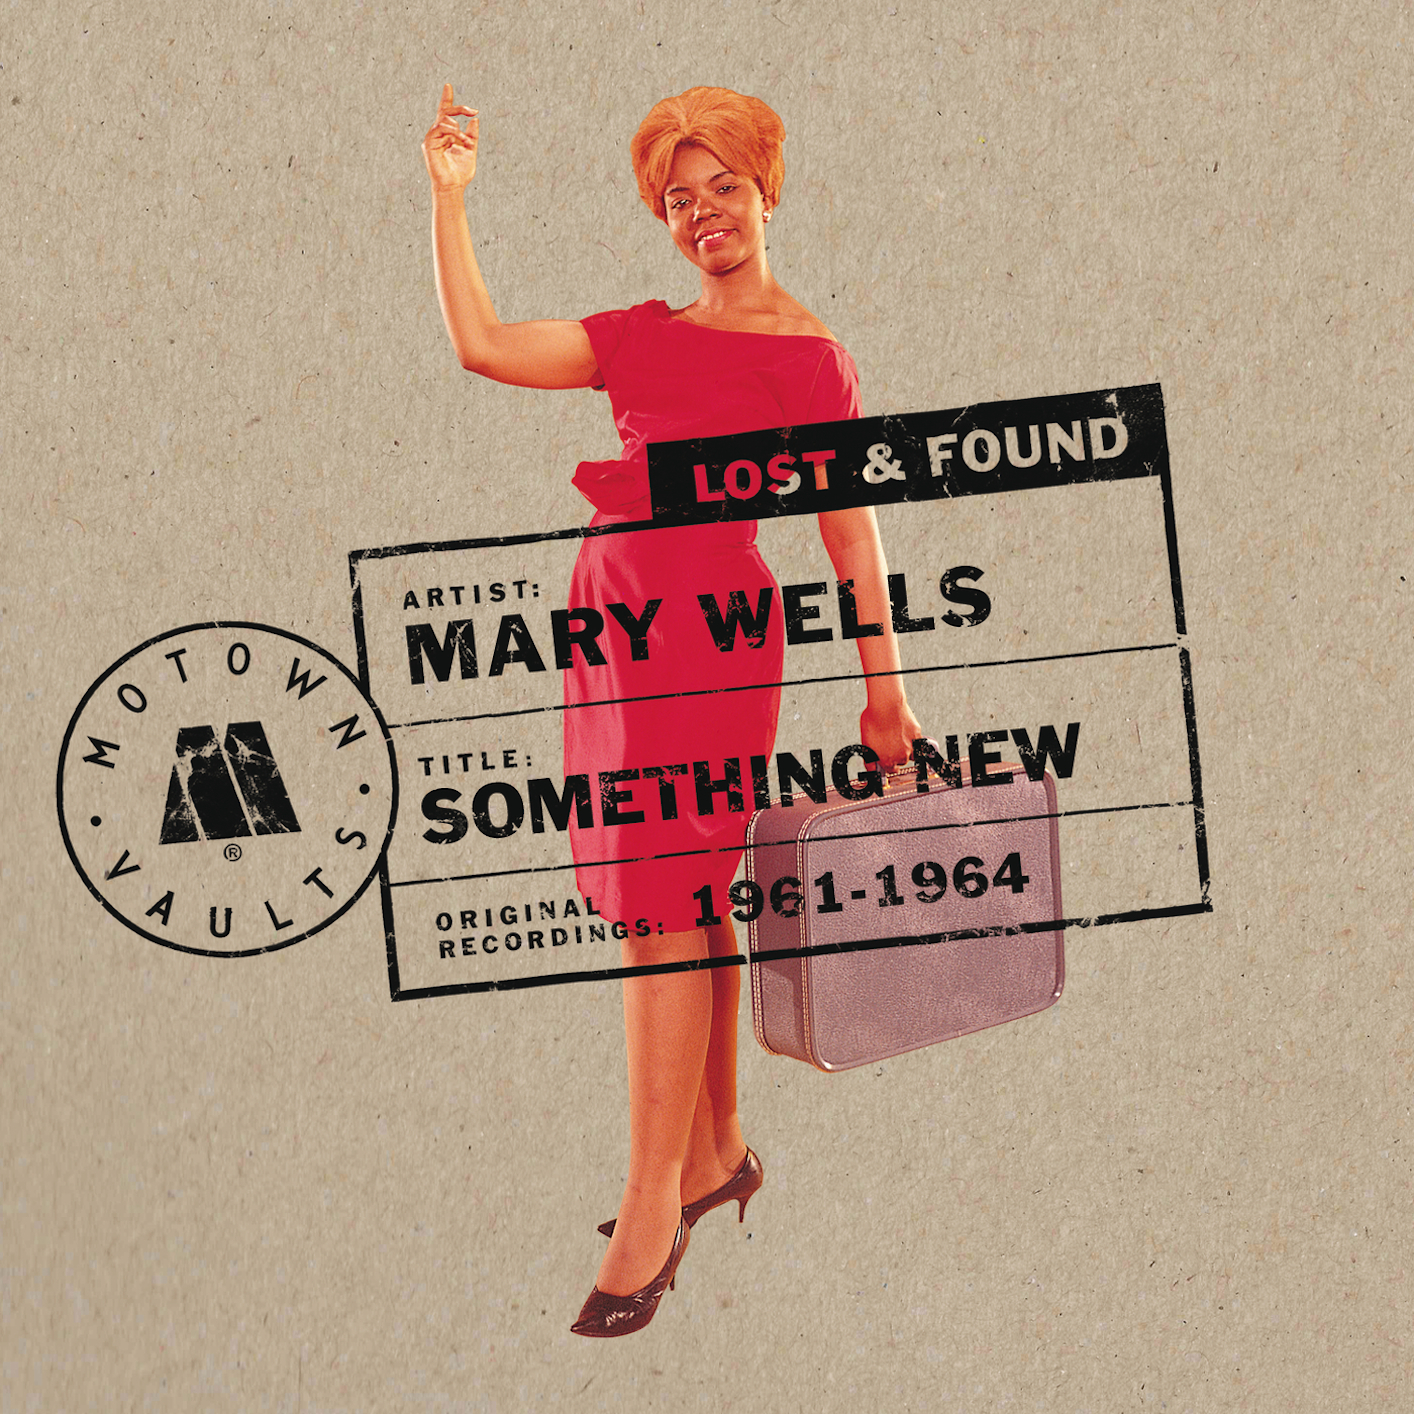 To find something better. Something New (1964). Mary do you wanna.